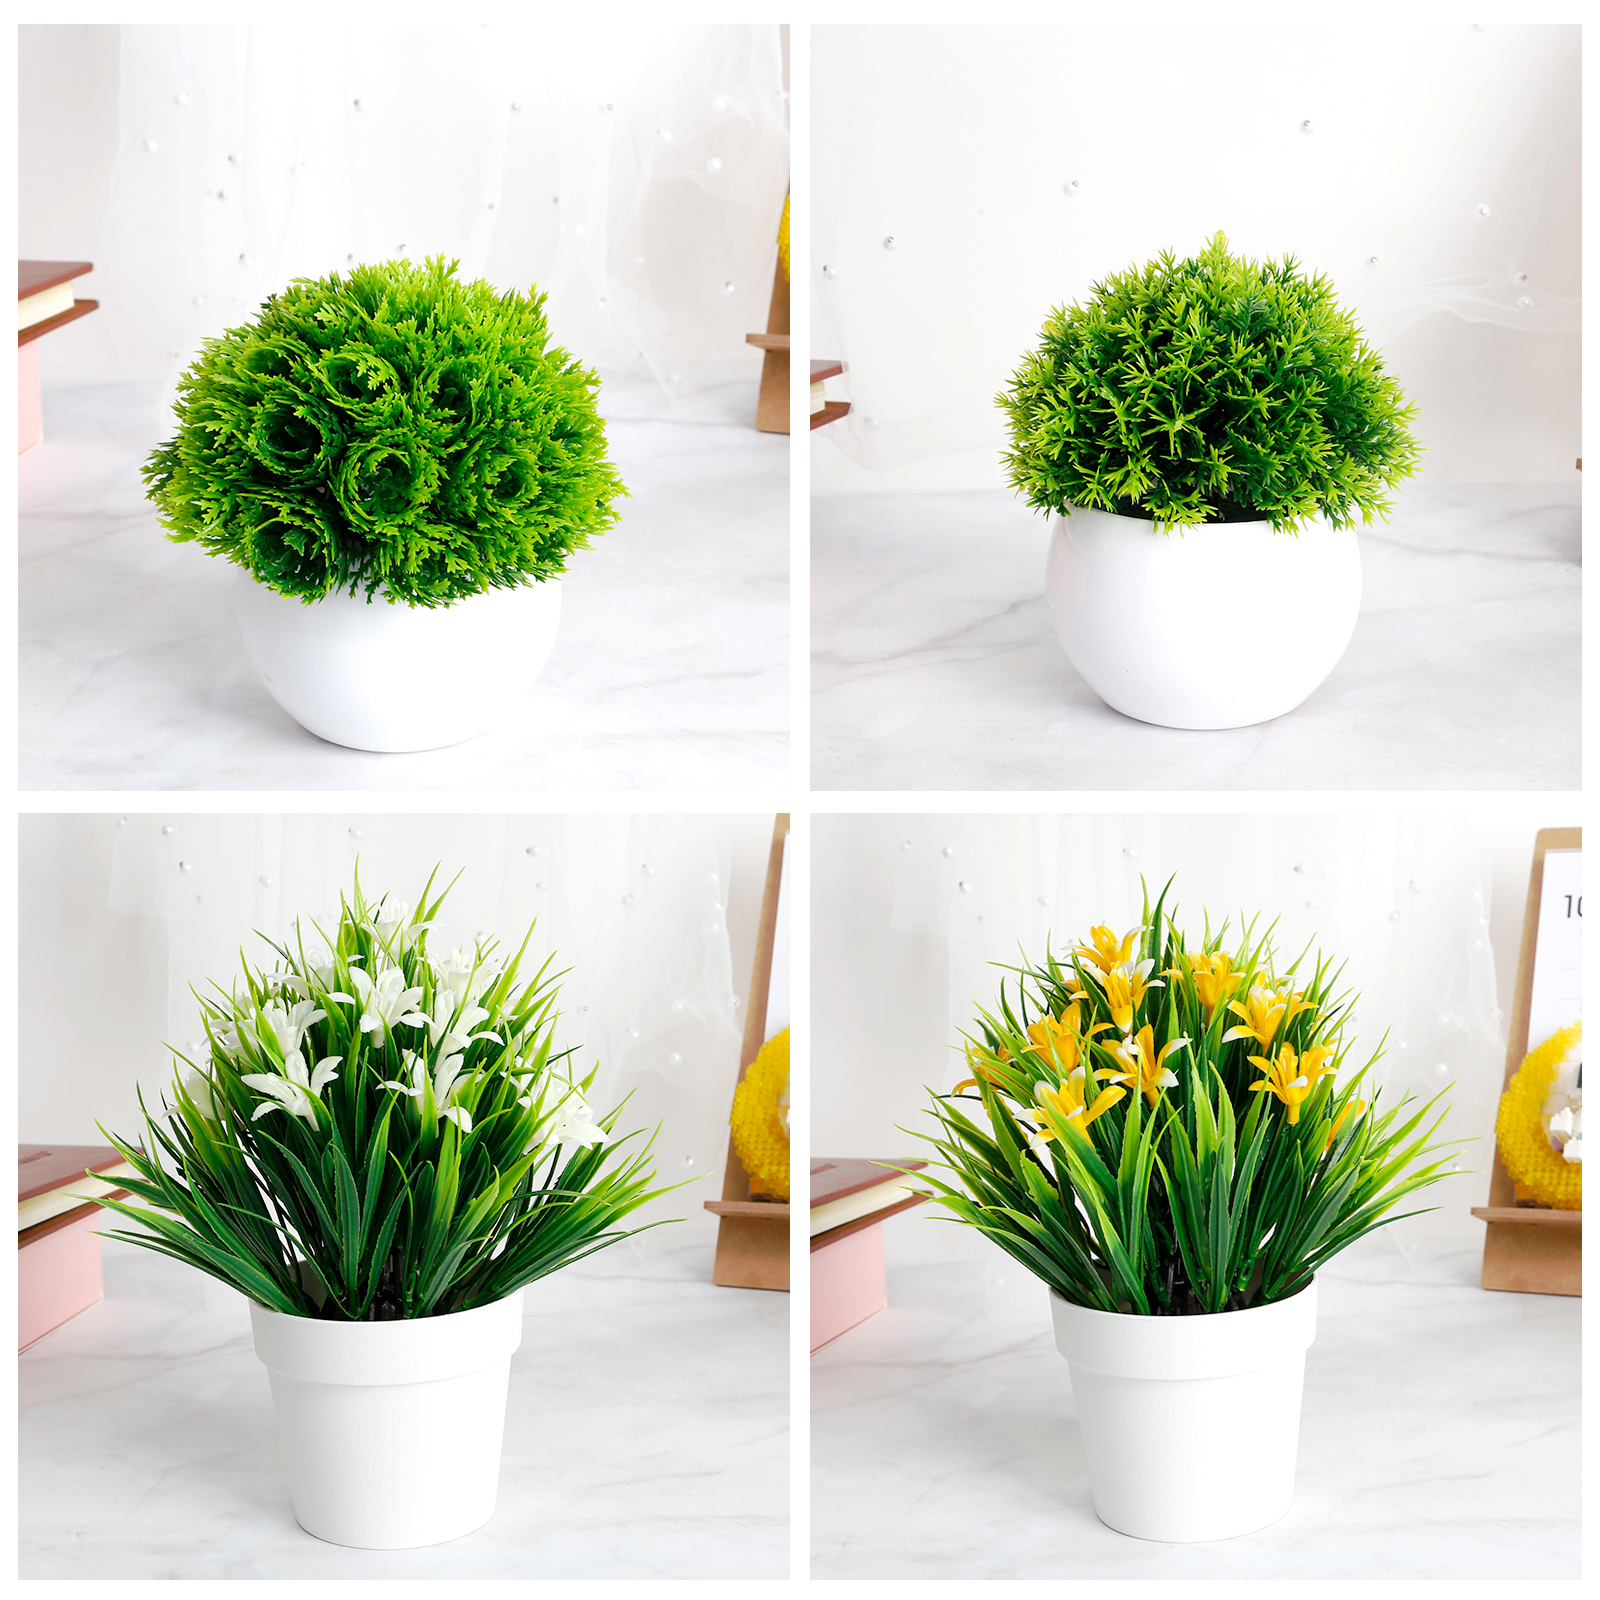 Karlesi 4 Pcs Artificial Plants & Flowers Potted for Bathroom Office Home,Small  Fake Plants in White Pot House Decor,Home Decoration